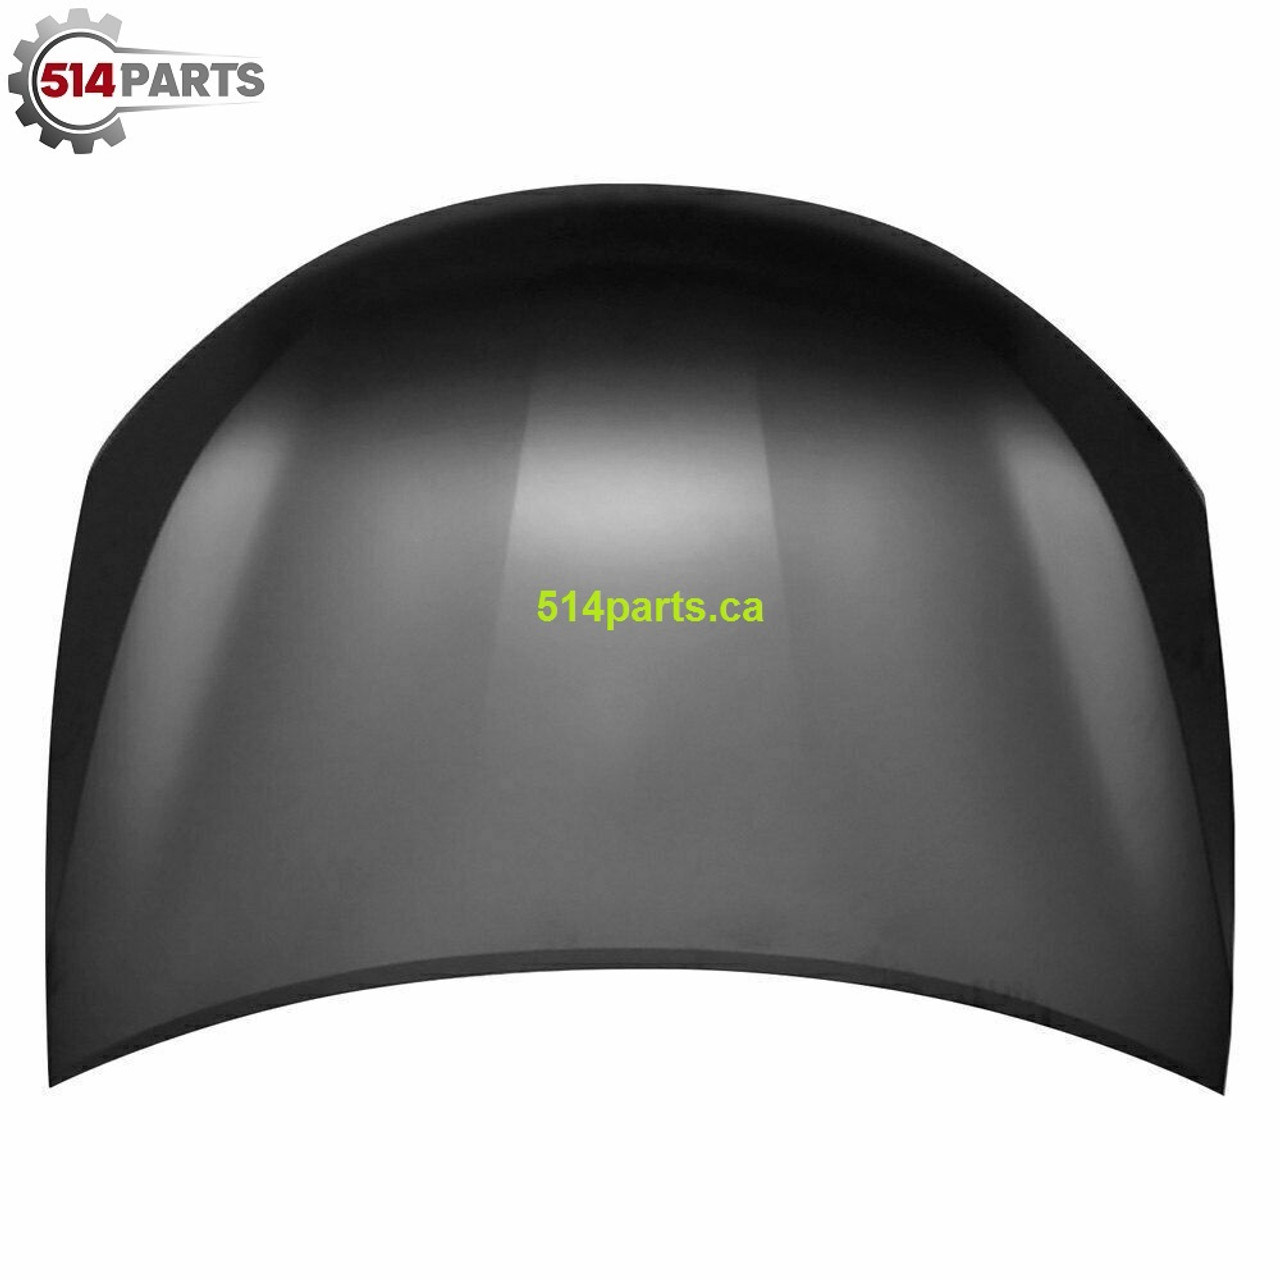 2015 - 2017 TOYOTA CAMRY and CAMRY HYBRID HOOD - CAPOT